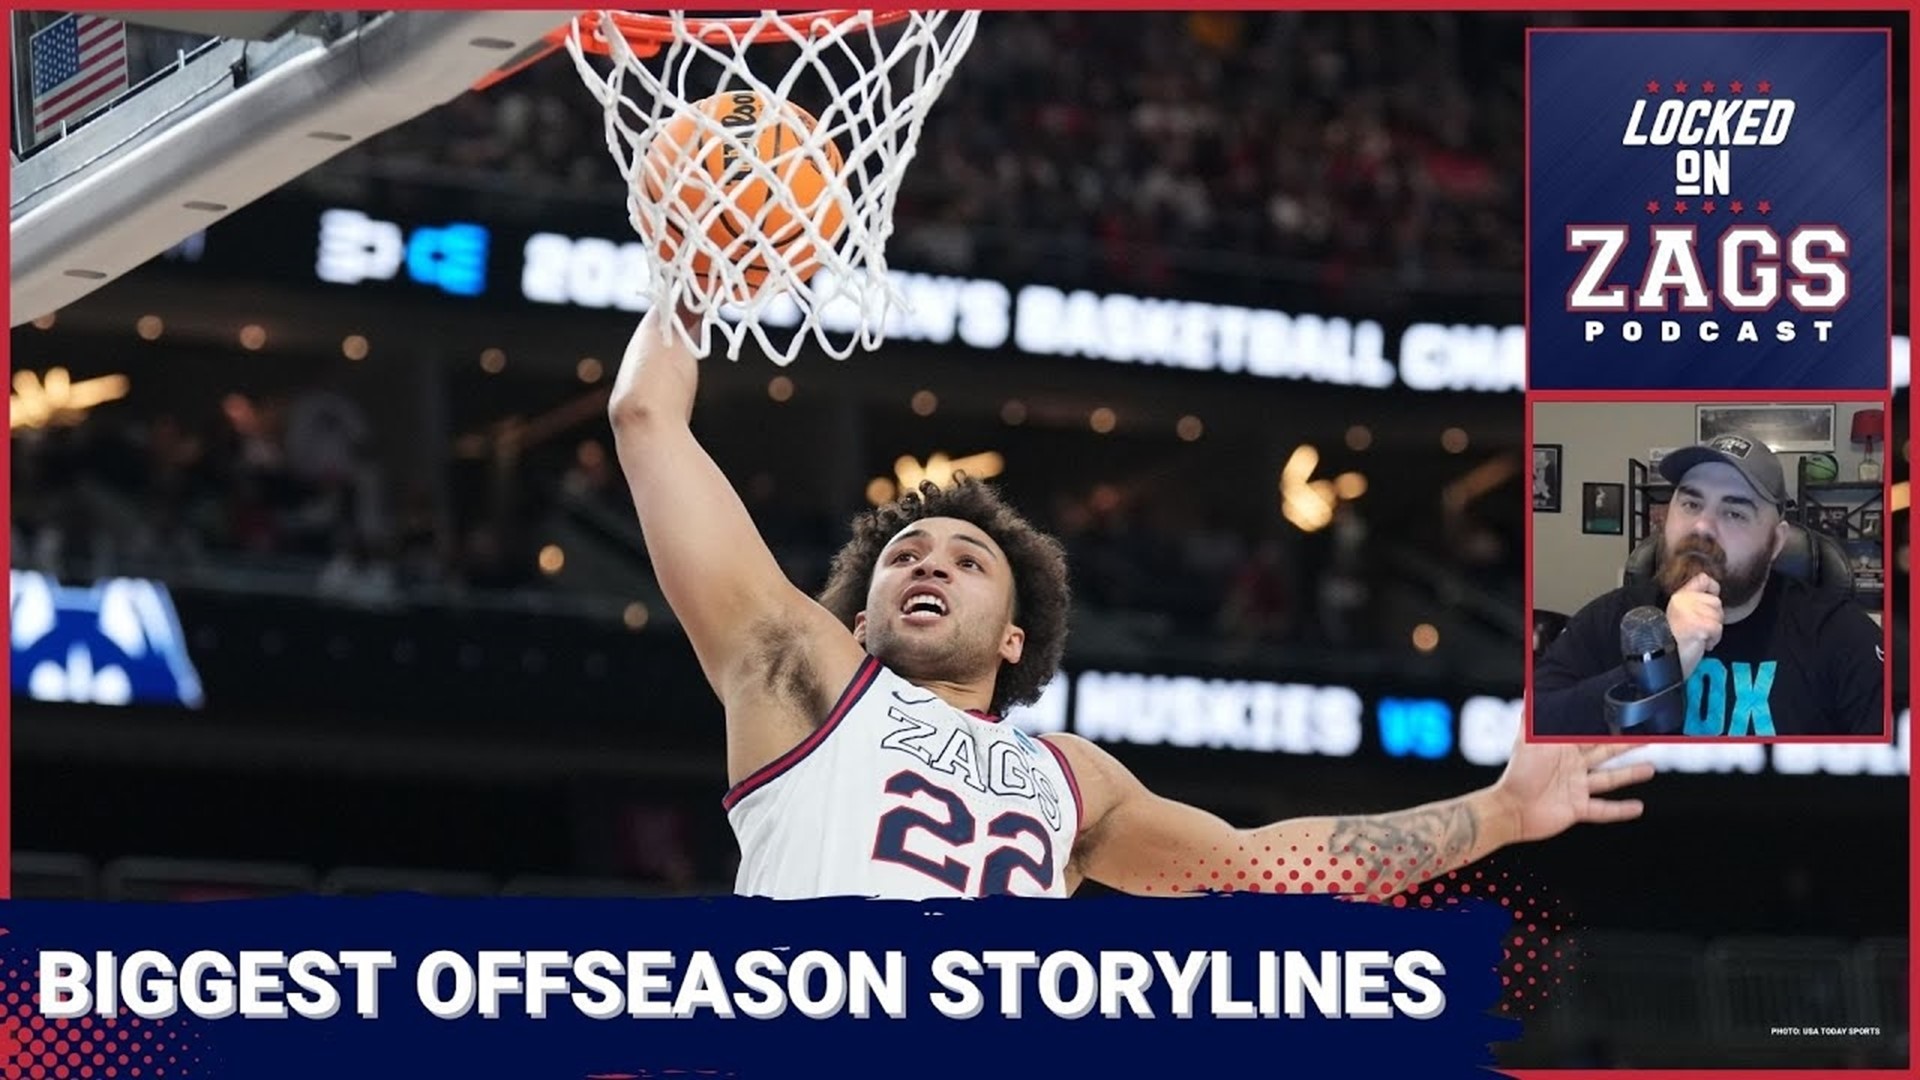 The Gonzaga Bulldogs offseason is here, and it promises to be full of intrigue in Spokane. We discuss the six biggest storylines surrounding Mark Few's team.